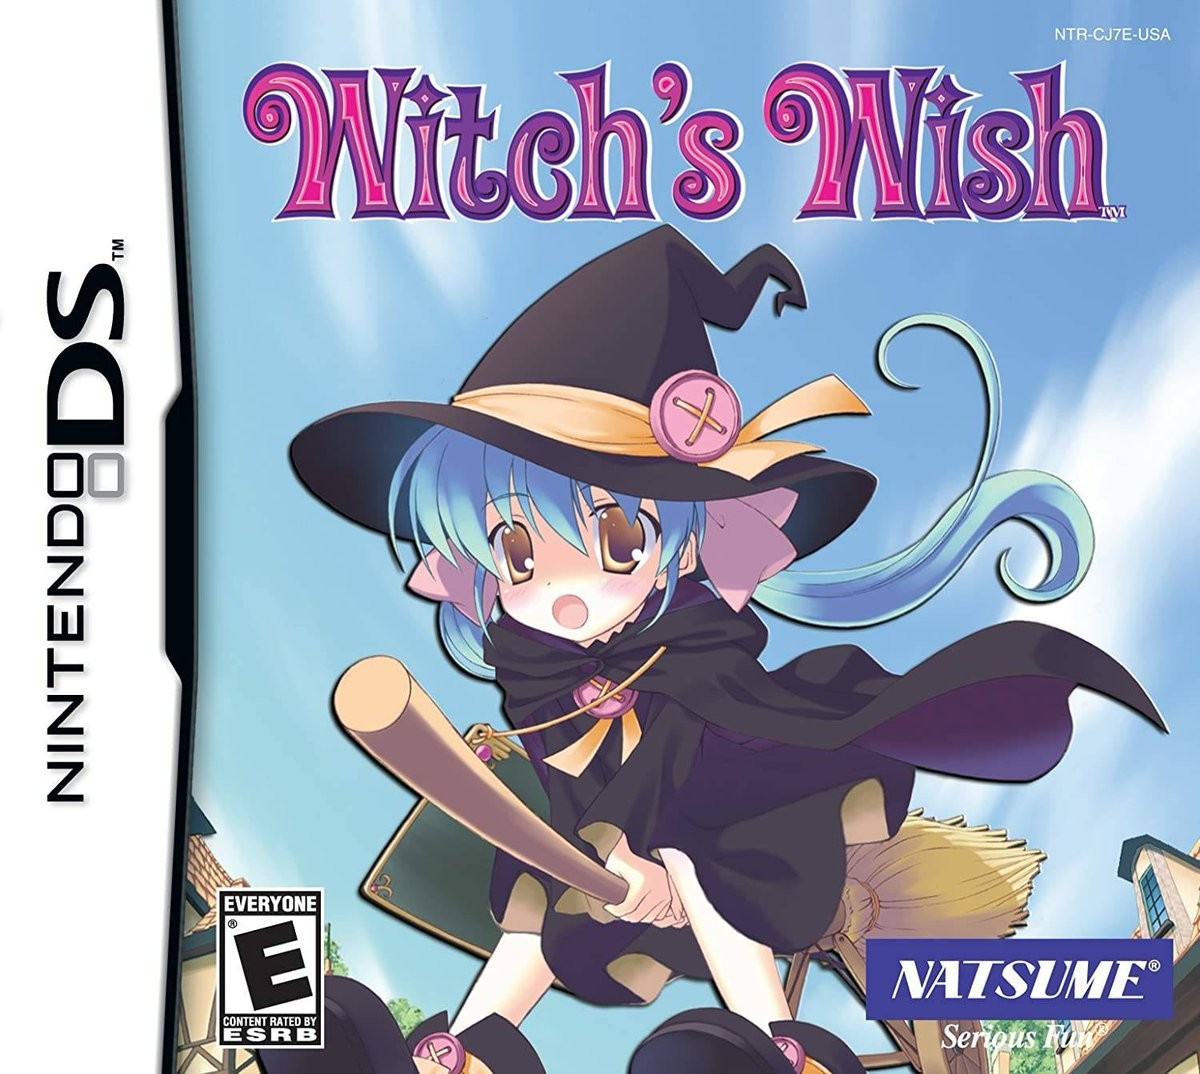 Witchs Wish cover